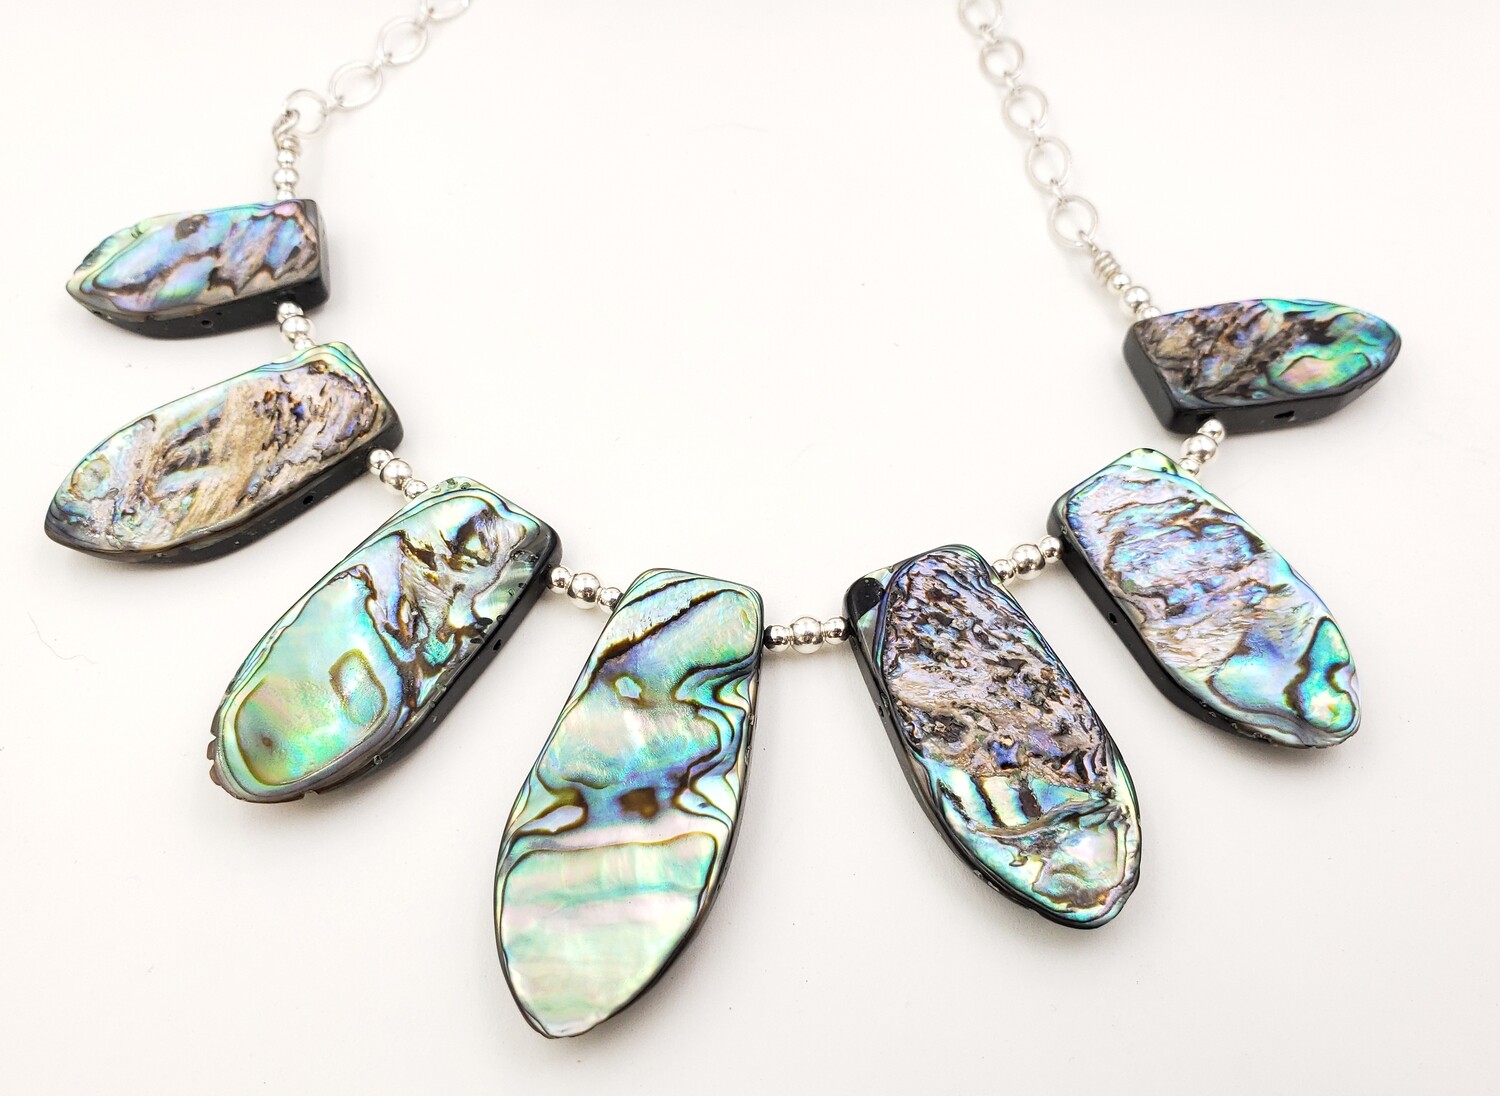 Abalone Shell Bib Necklace with Silver Beads